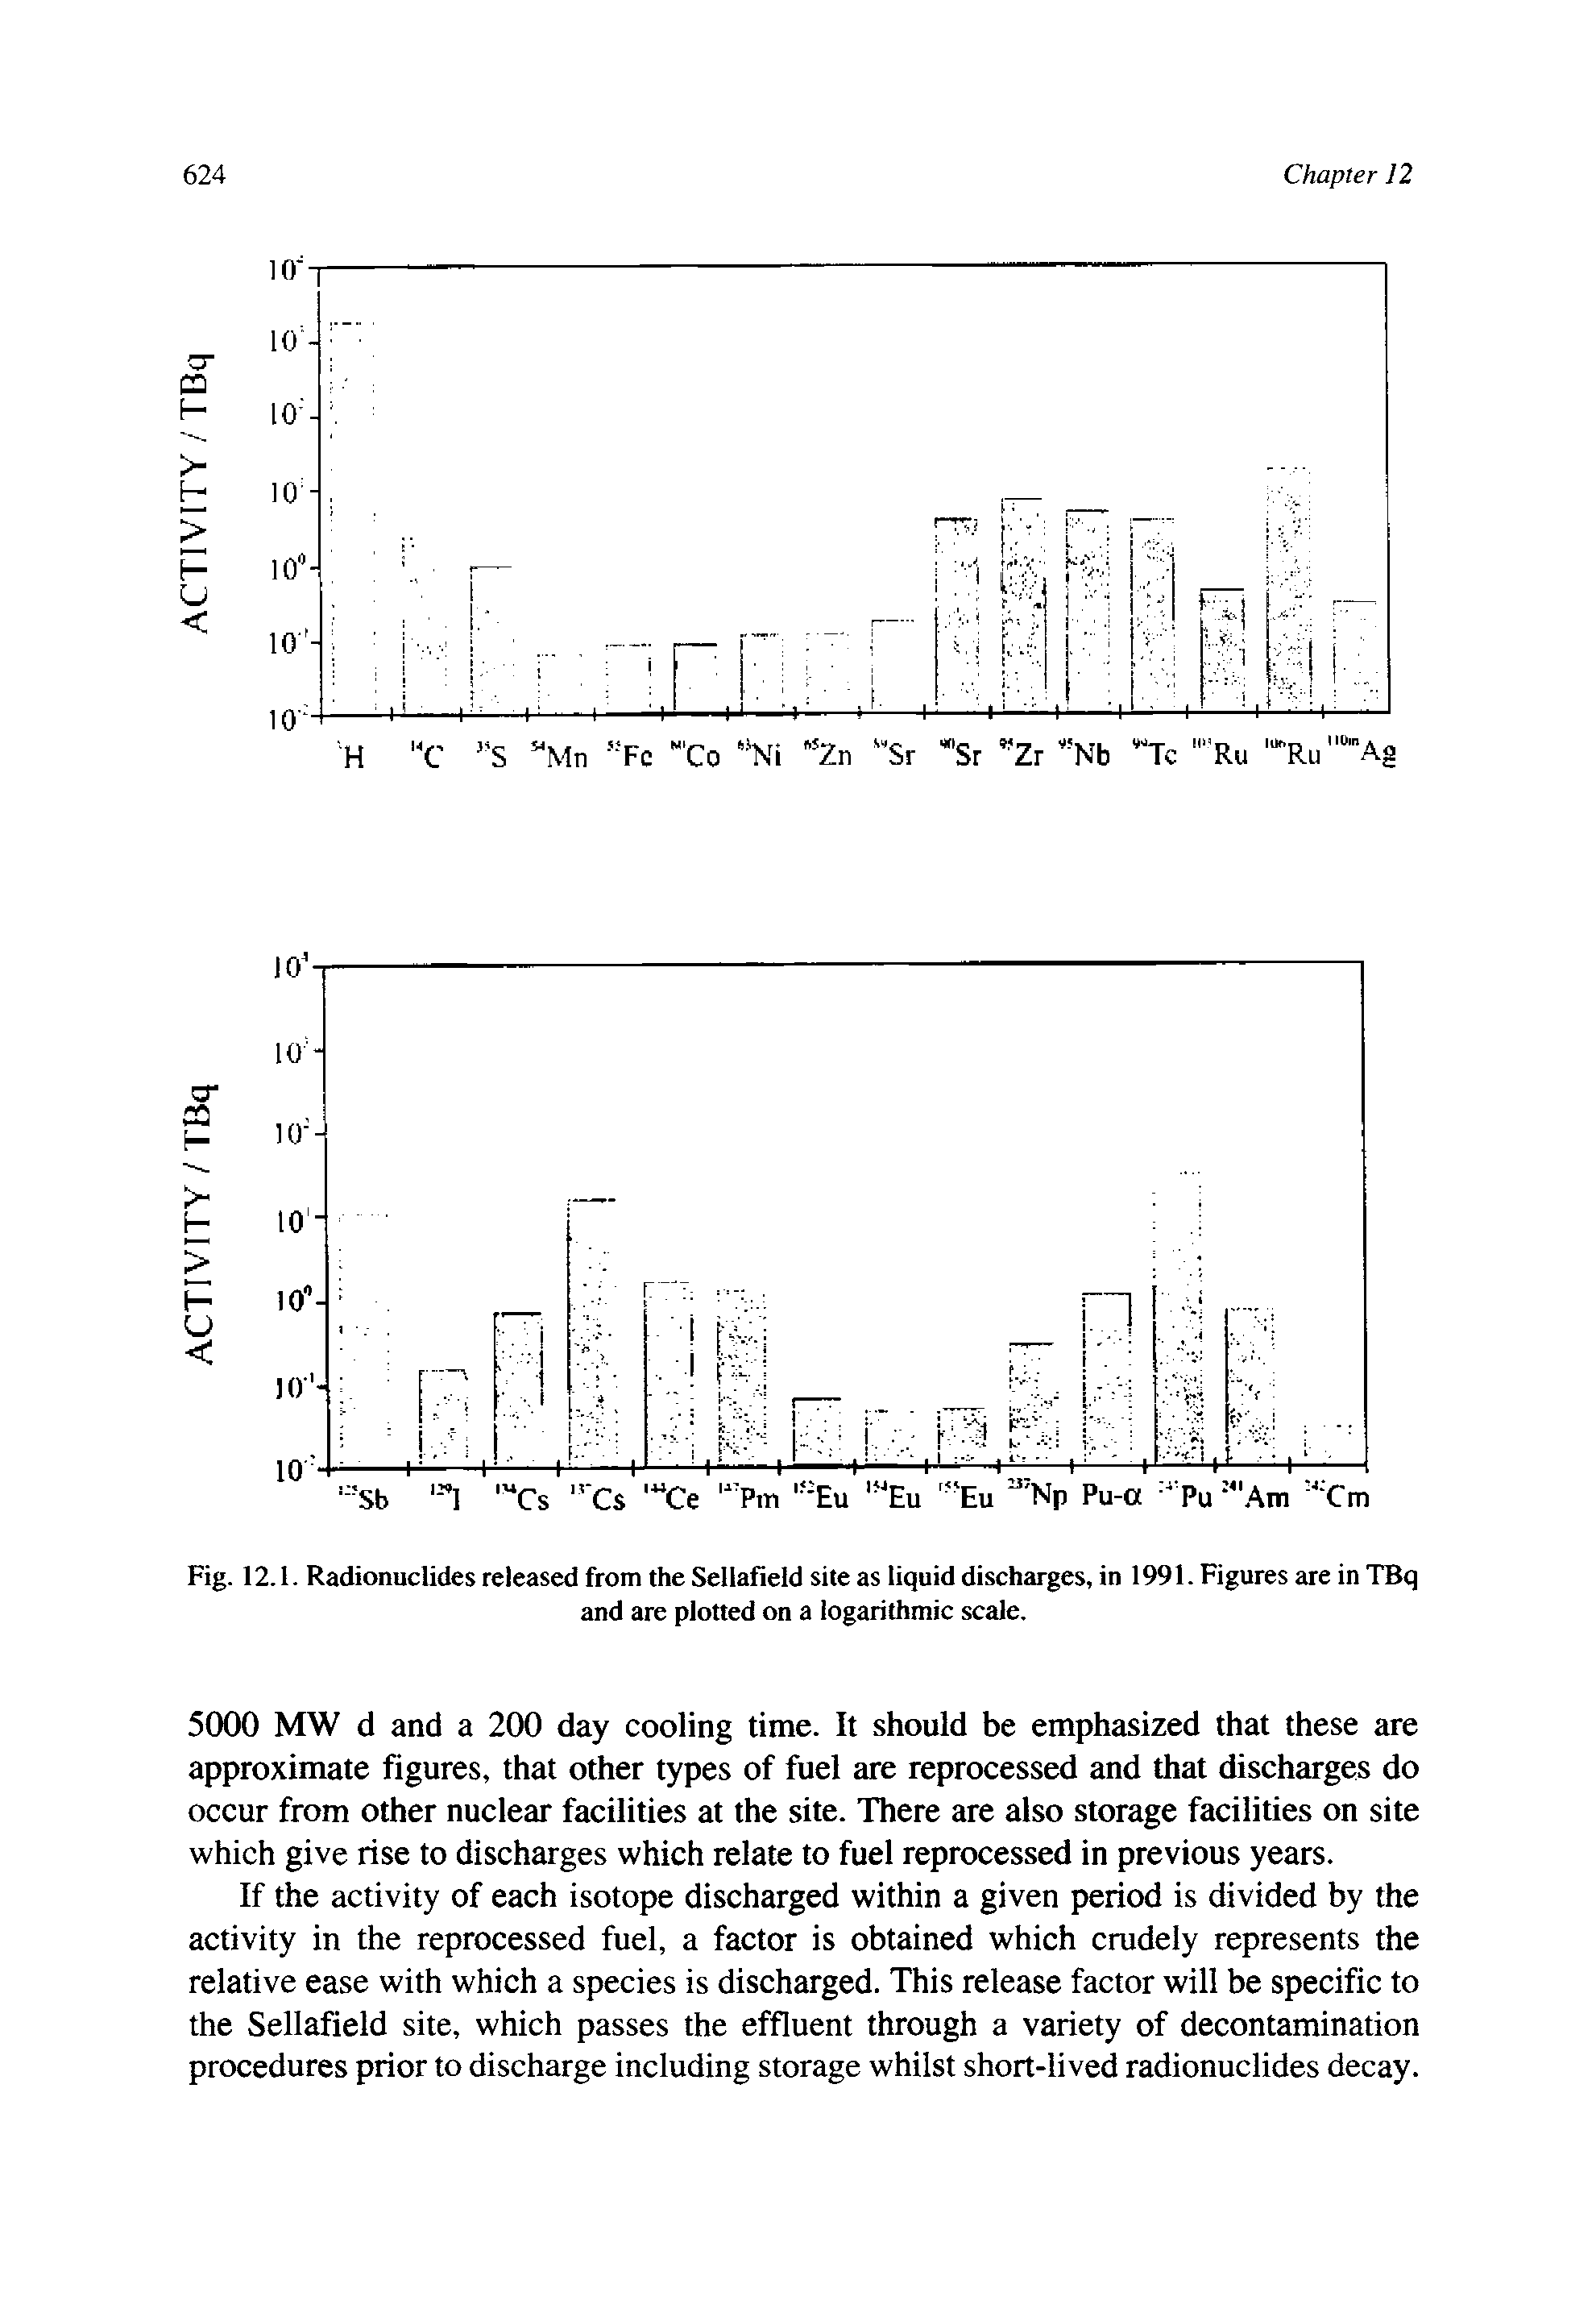 Fig. 12.1. Radionuclides released from the Sellafield site as liquid discharges, in 1991. Figures are in TBq...